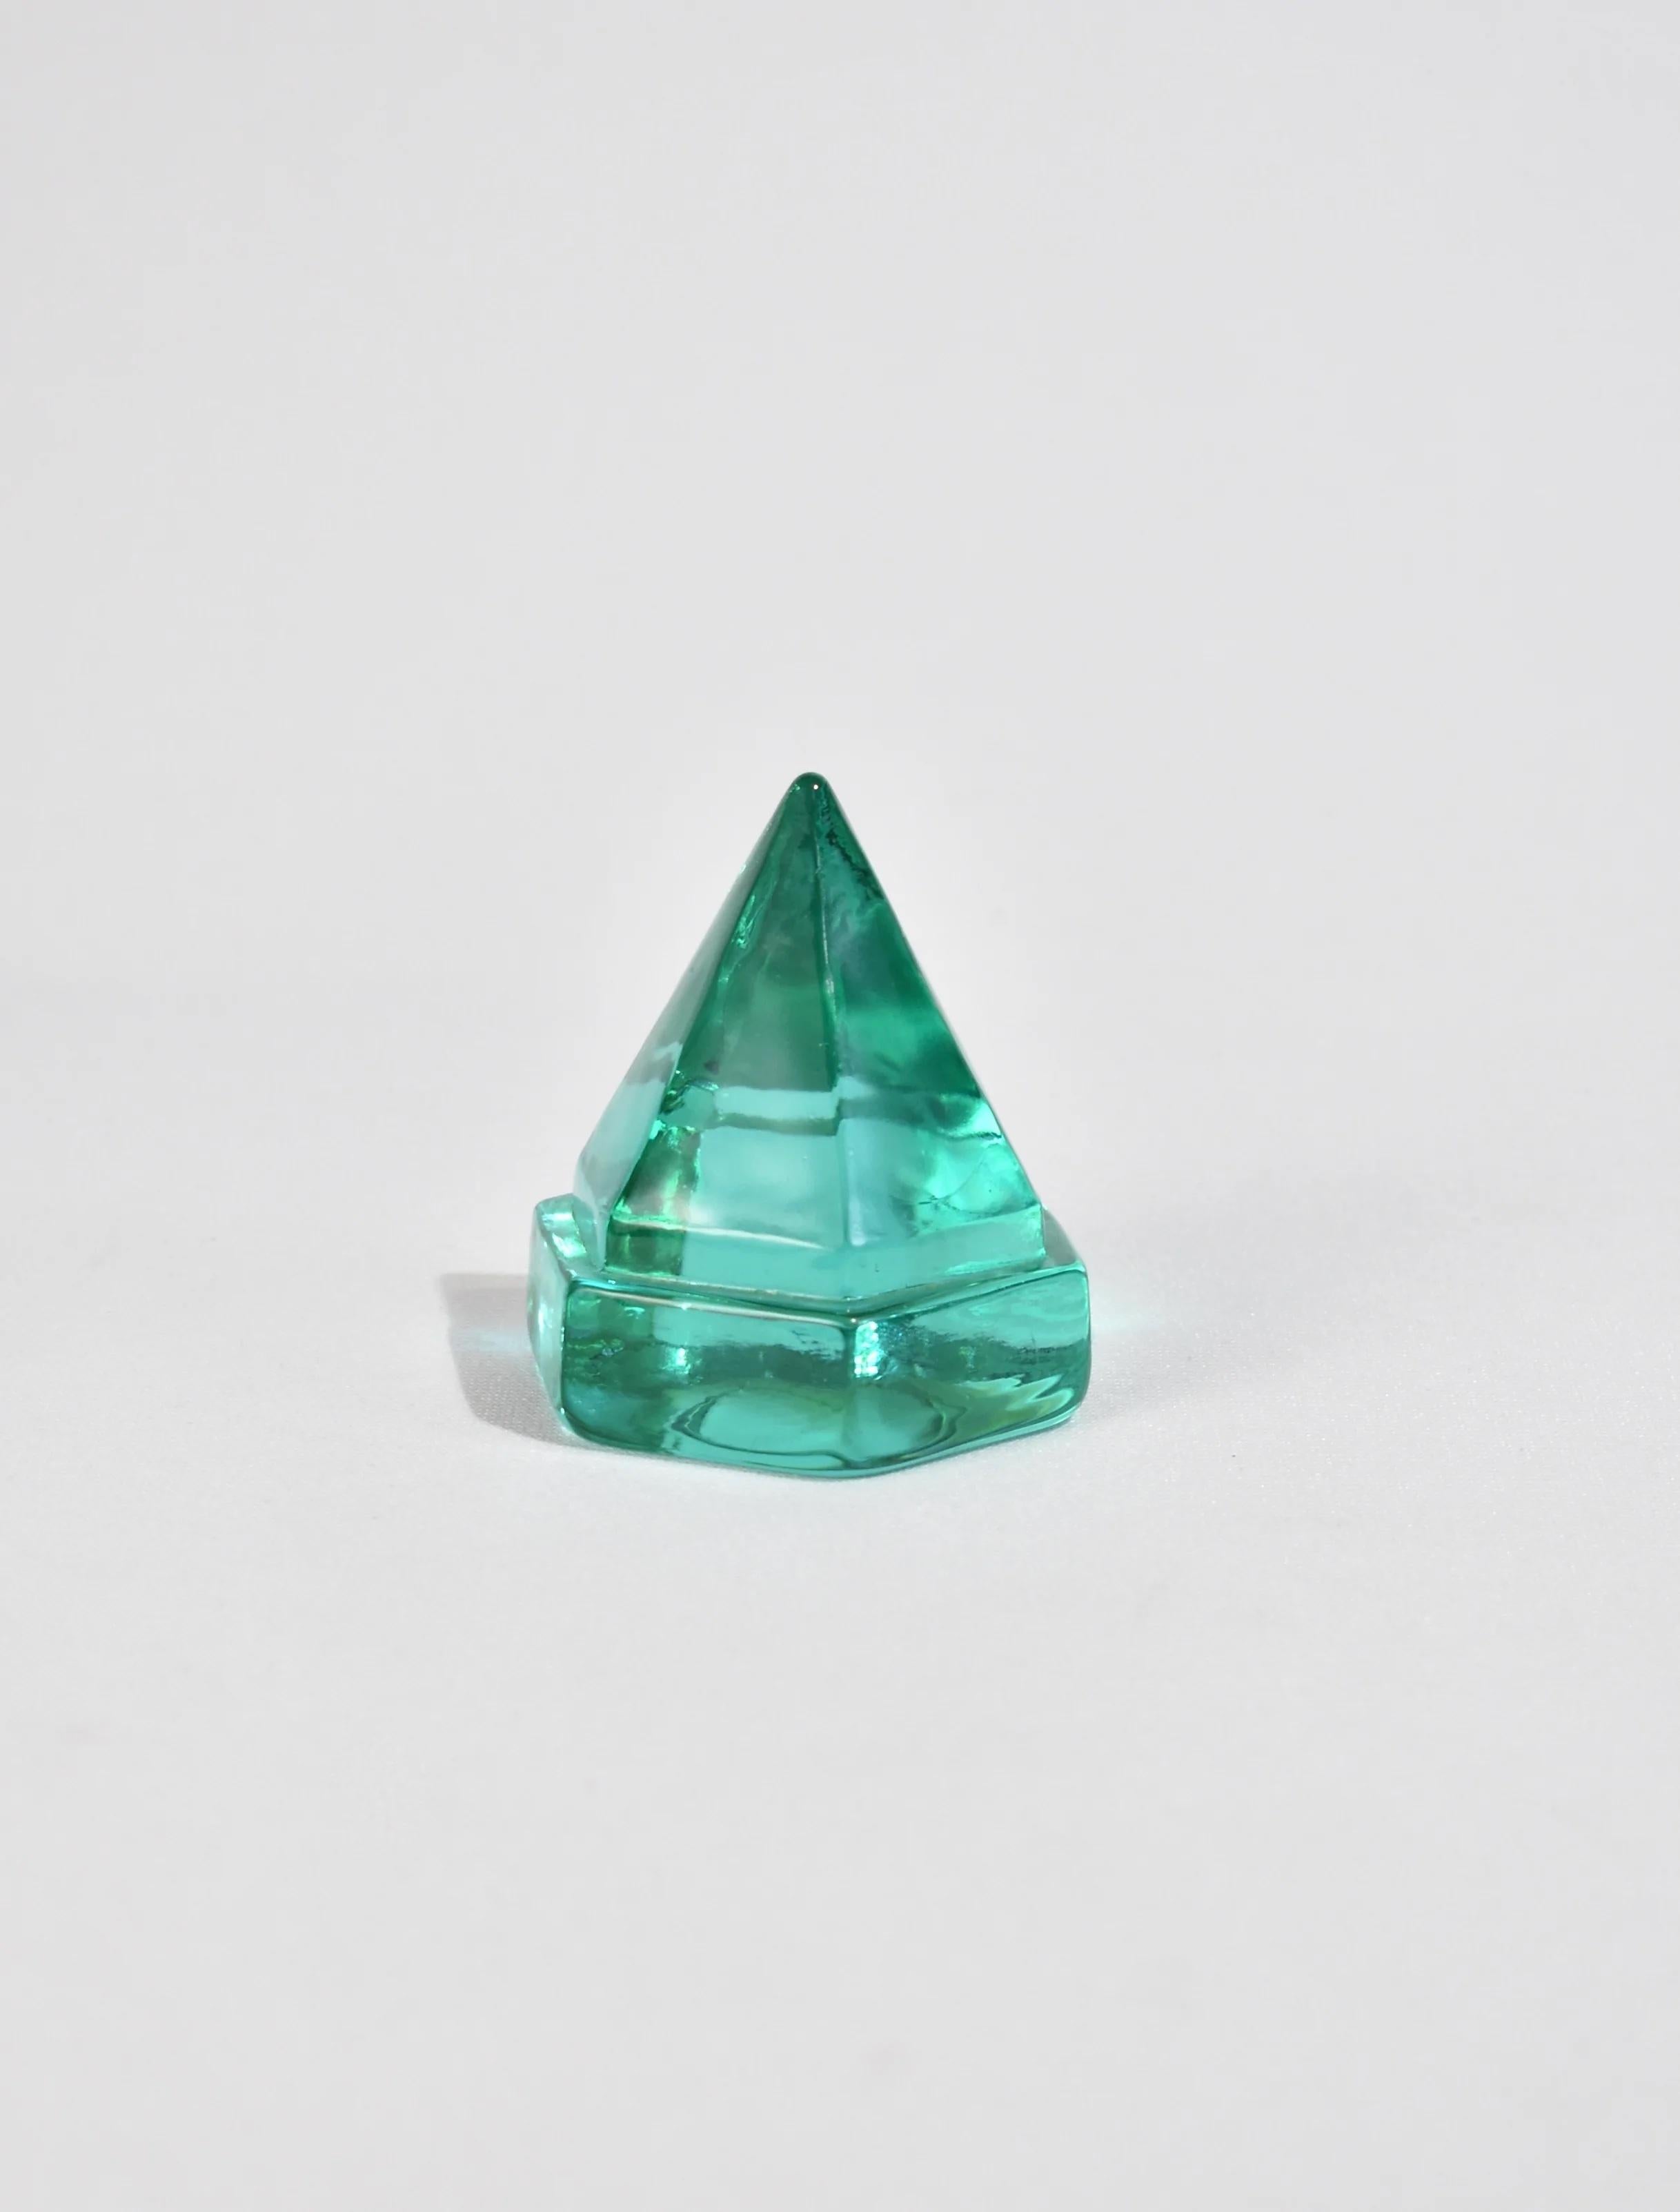 20th Century Teal Glass Prism